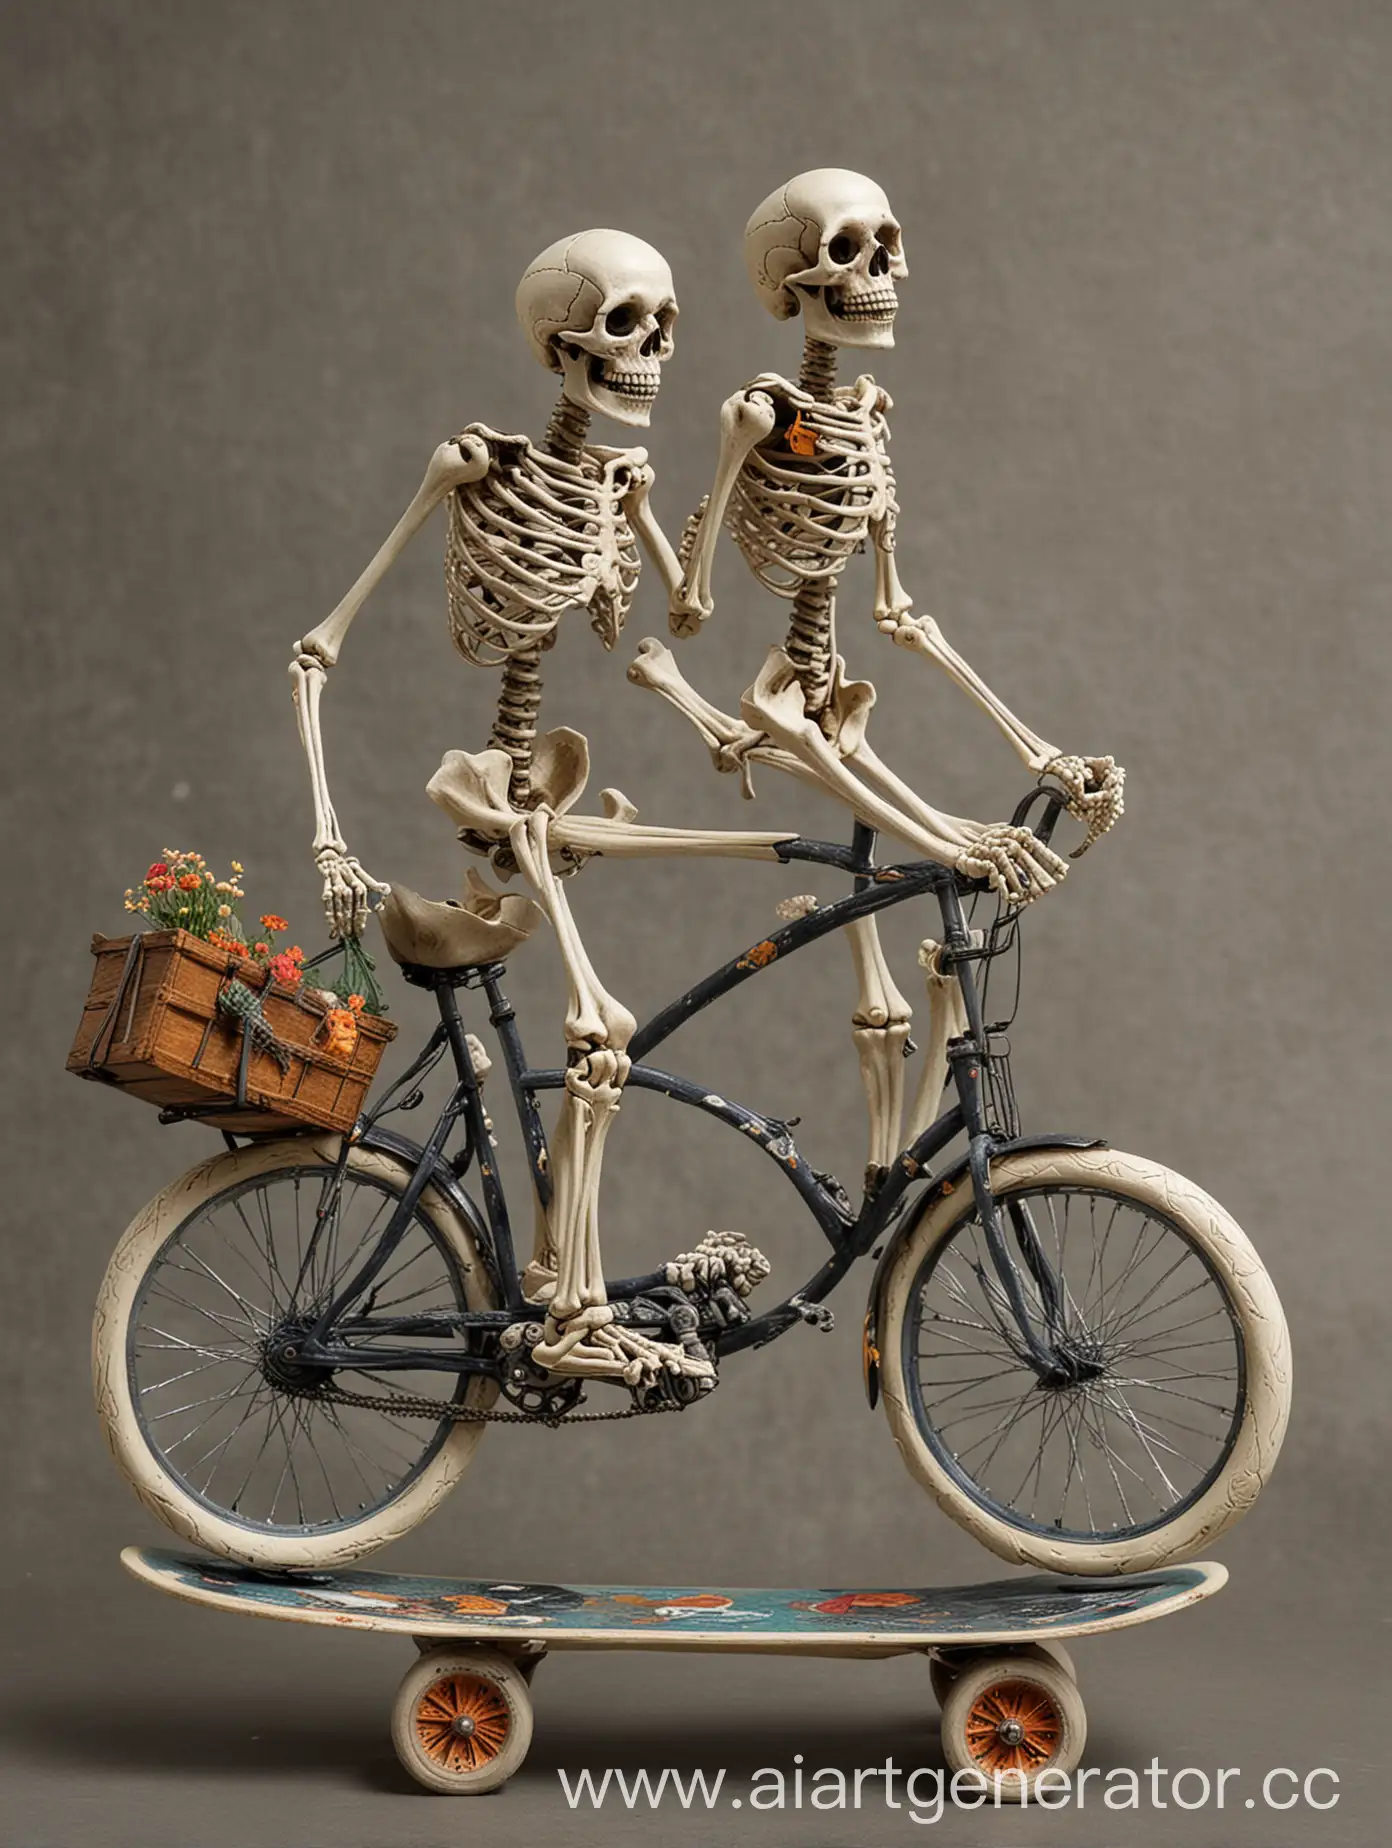 Skeletons-Riding-Bicycle-and-Skateboard-in-Moonlit-Night